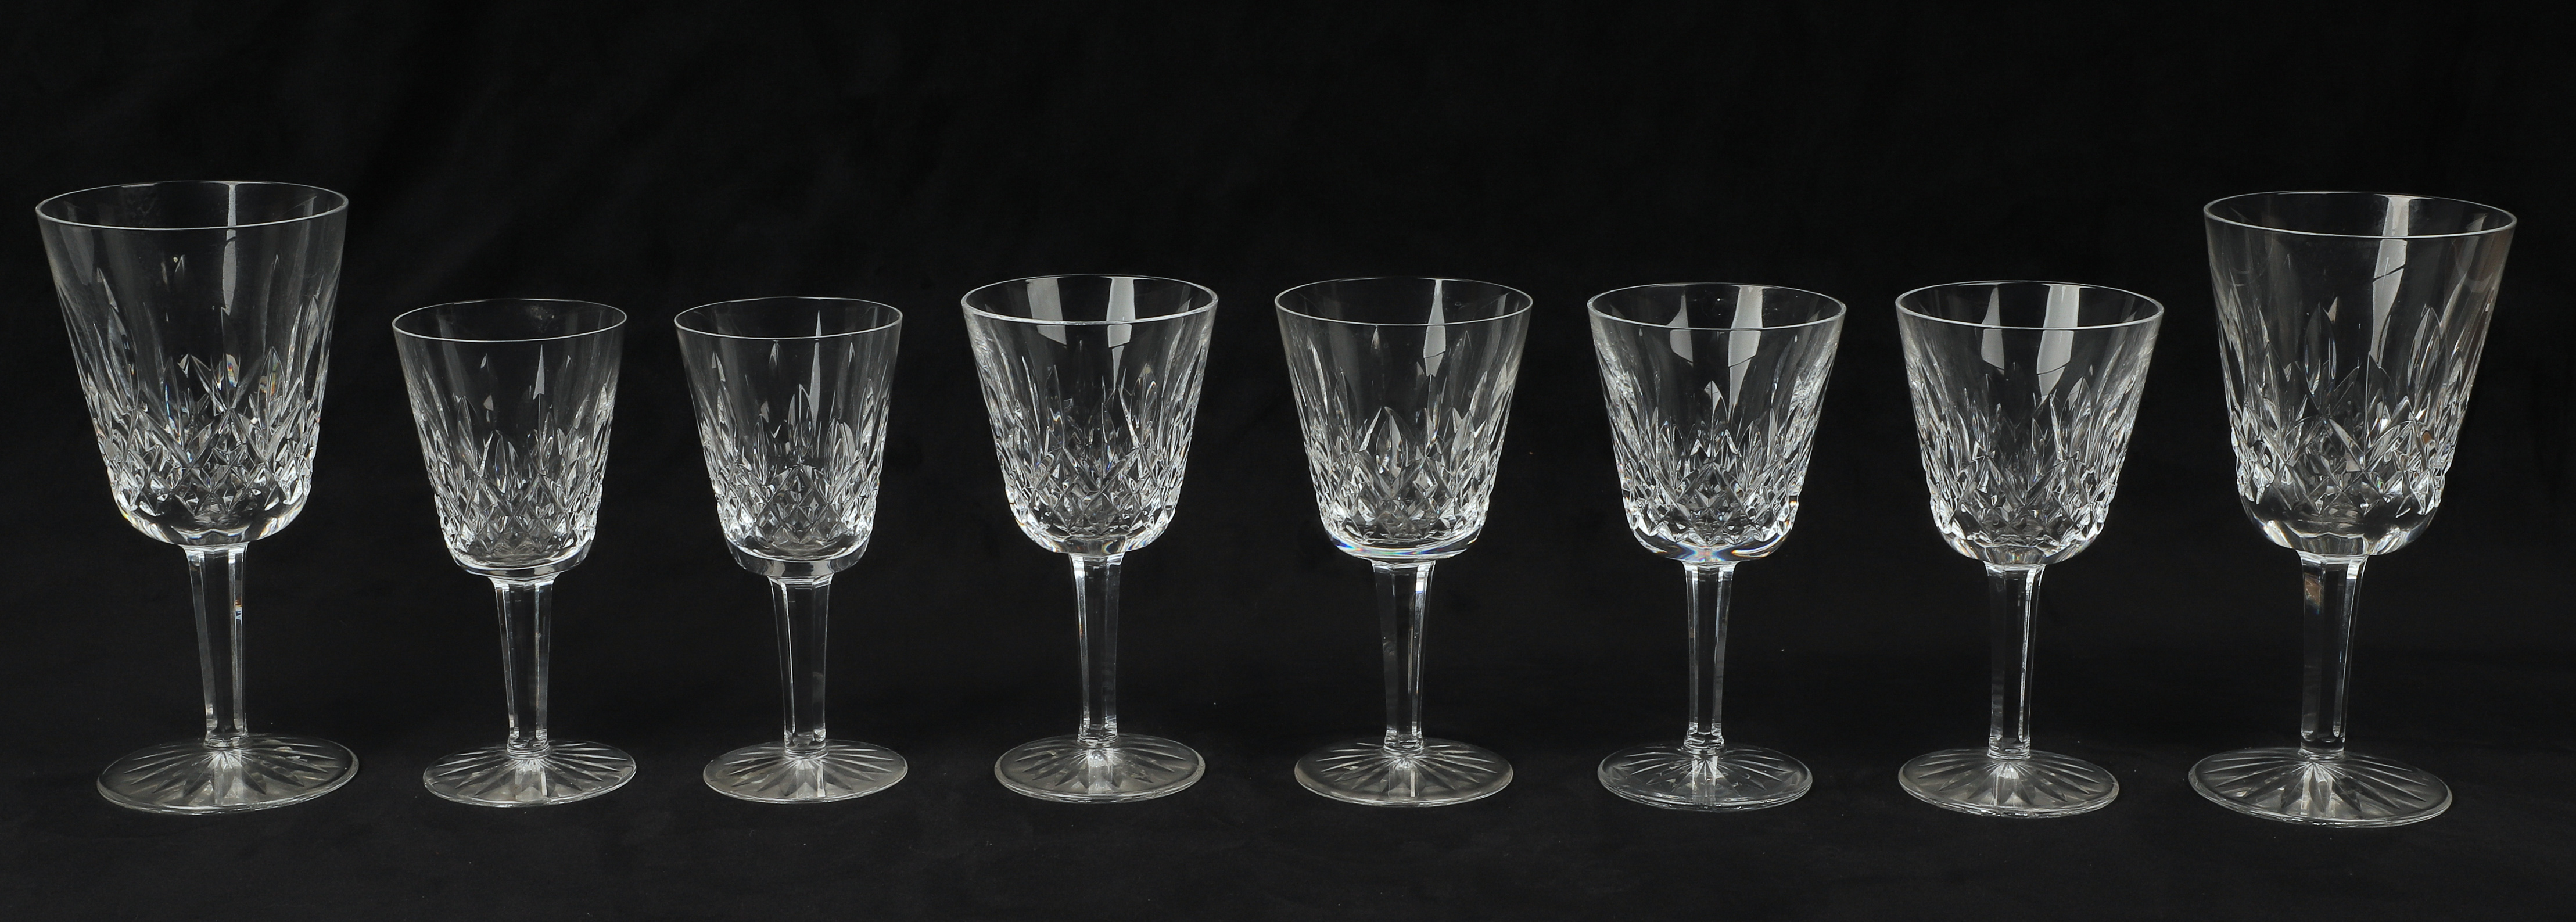  8 Waterford Lismore glasses to 2e2381